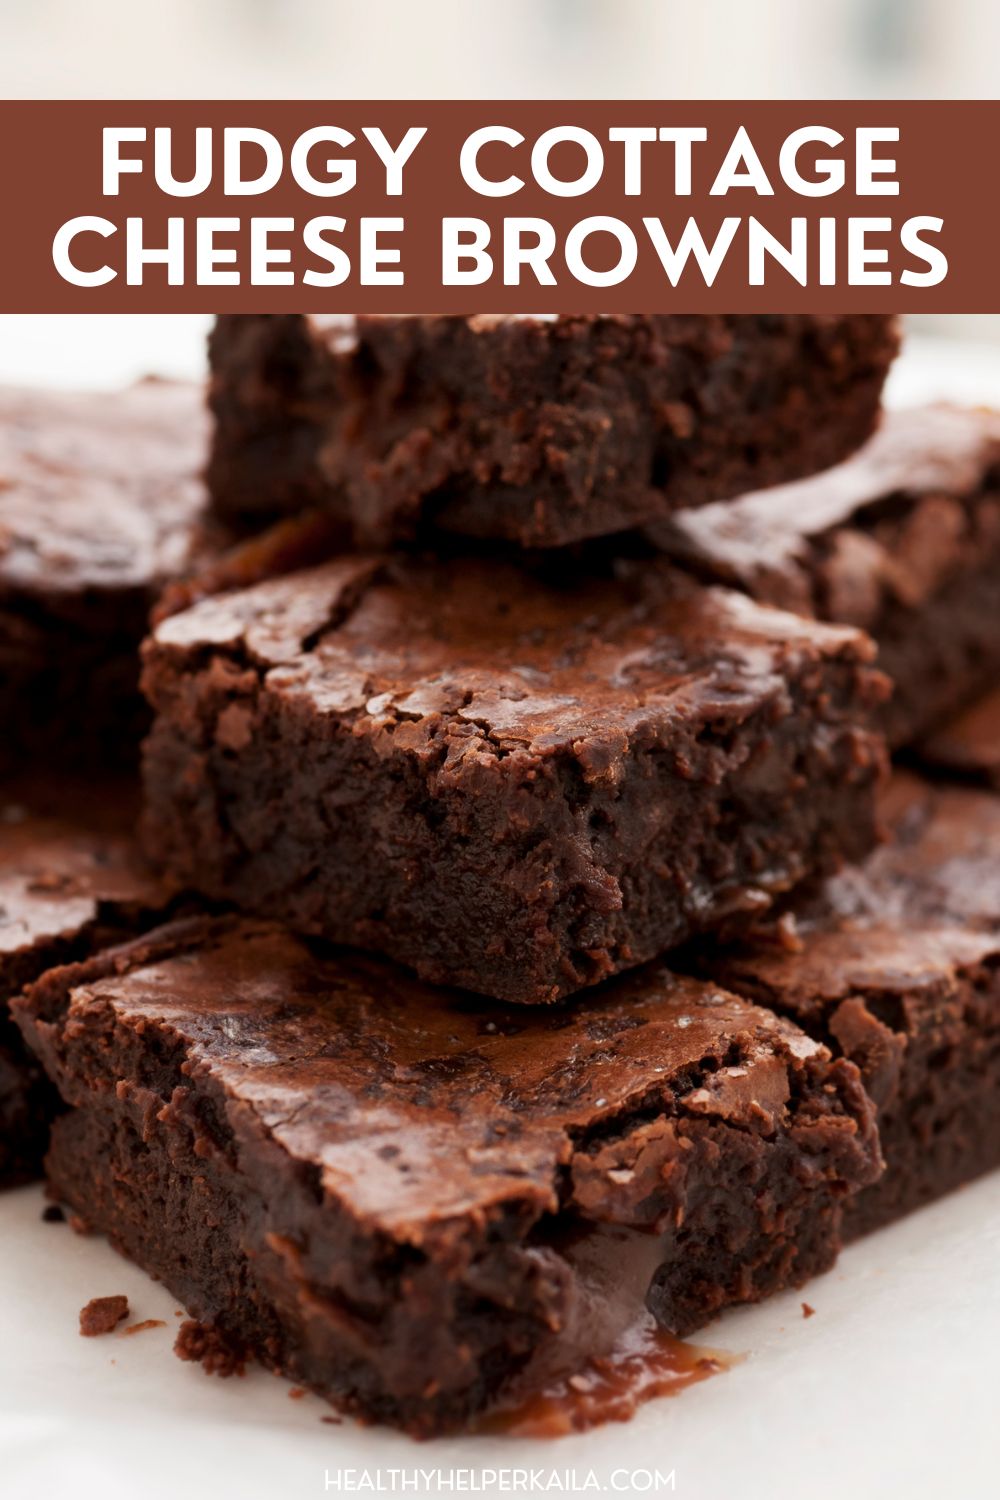 Fudgy brownies with a high protein twist thanks to cottage cheese! These Cottage Cheese Brownies are gluten-free and have no added sugar.